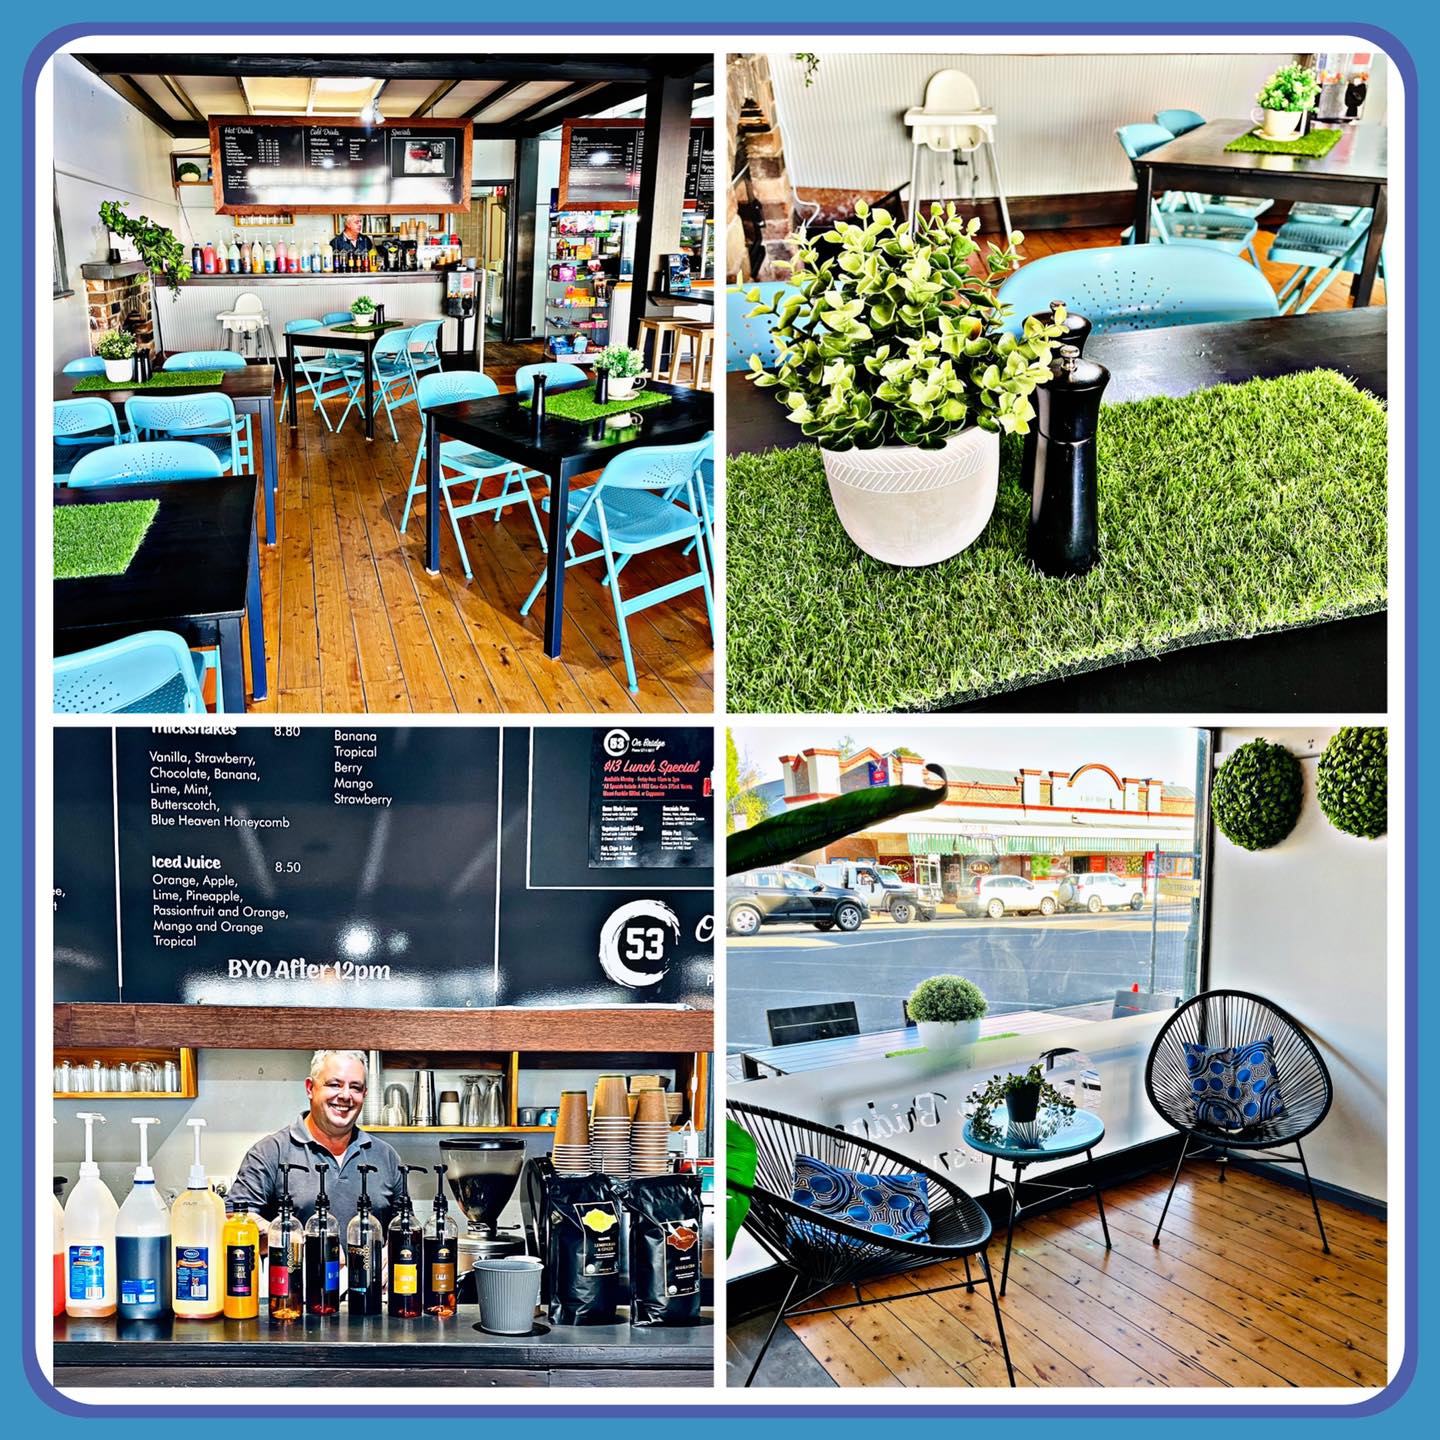 Collage of cafe location shots